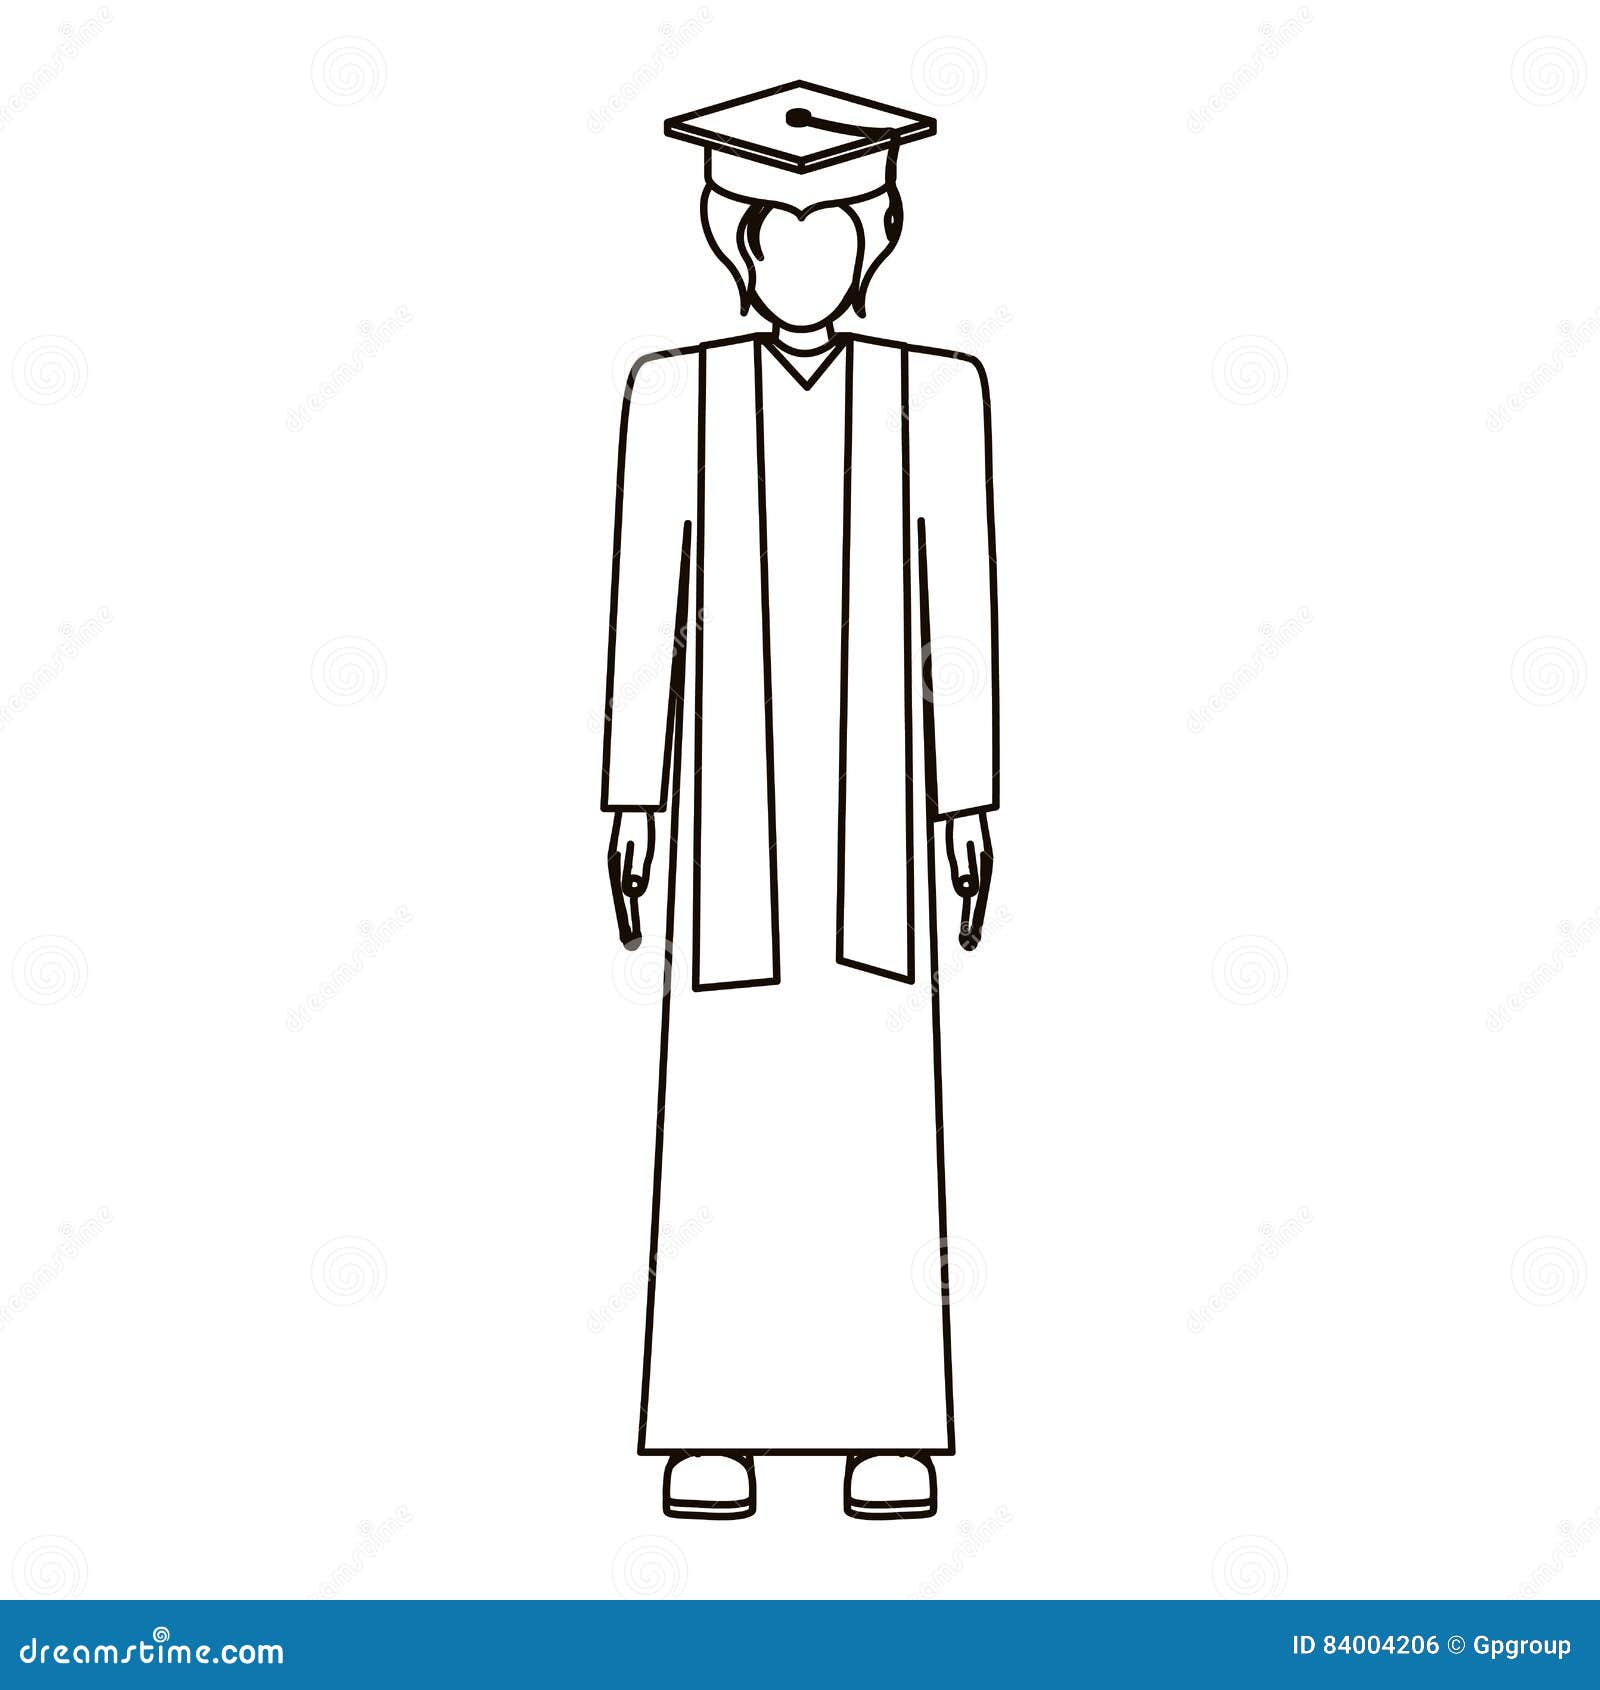 Isolated Boy with Graduation Cap Design Stock Vector - Illustration of ...